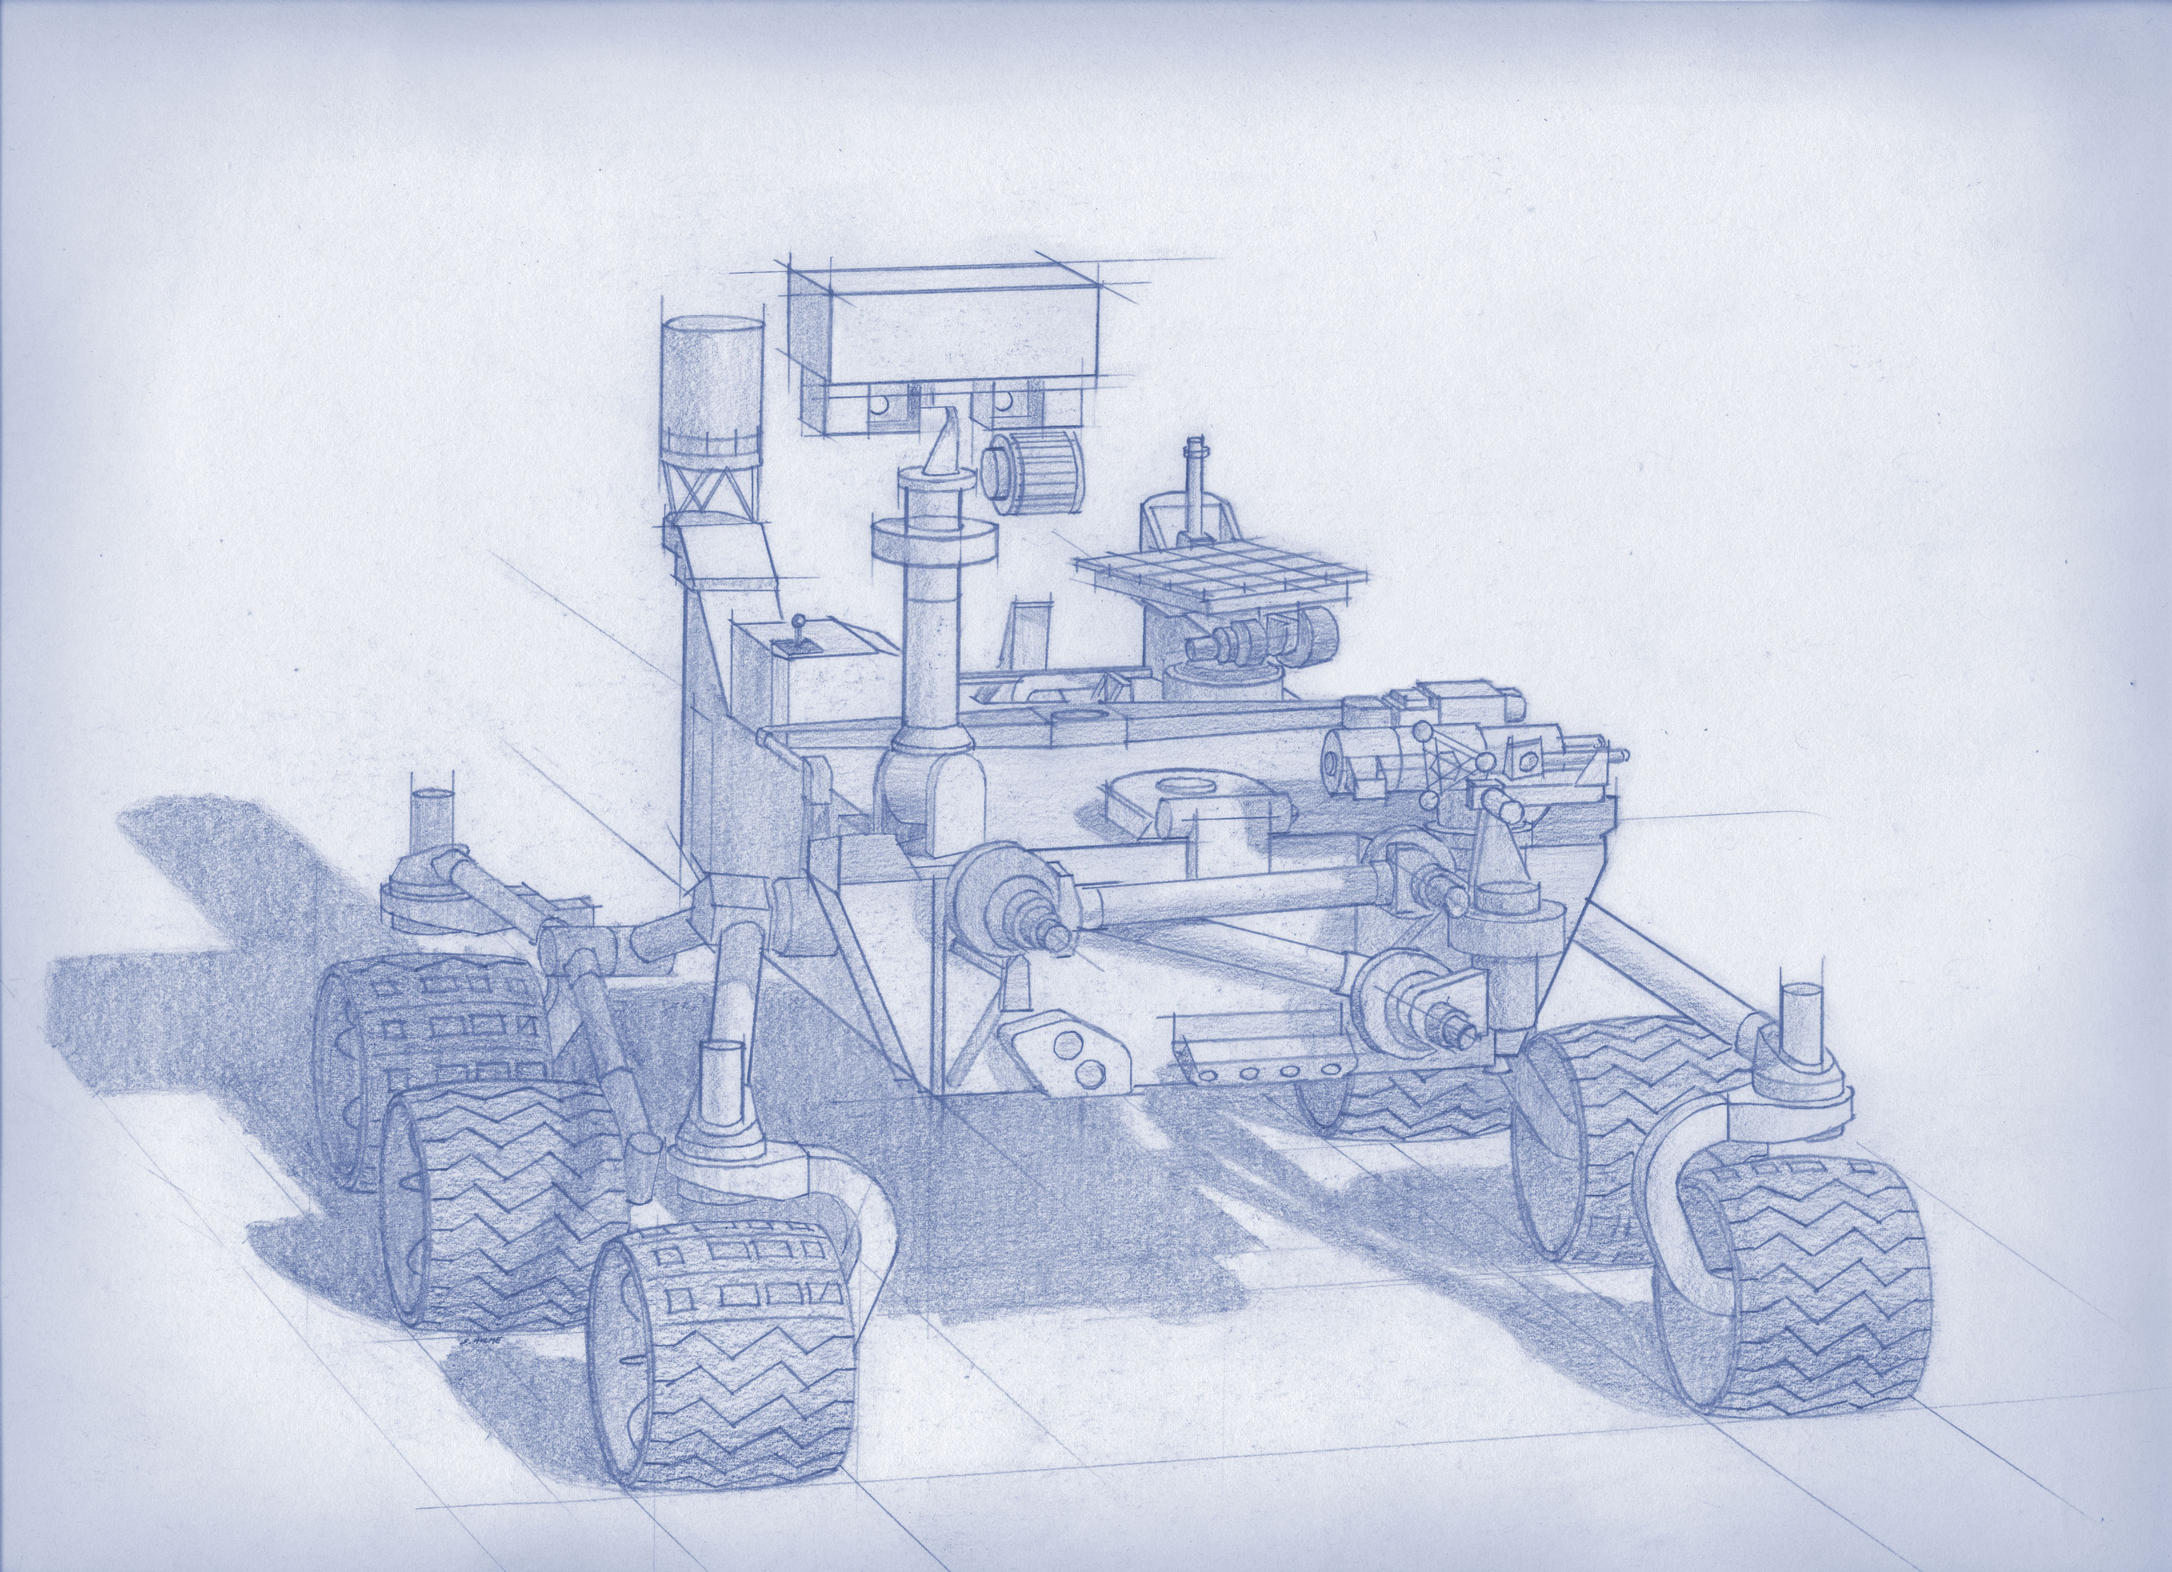 Artist's Concept of Mars 2020 Rover